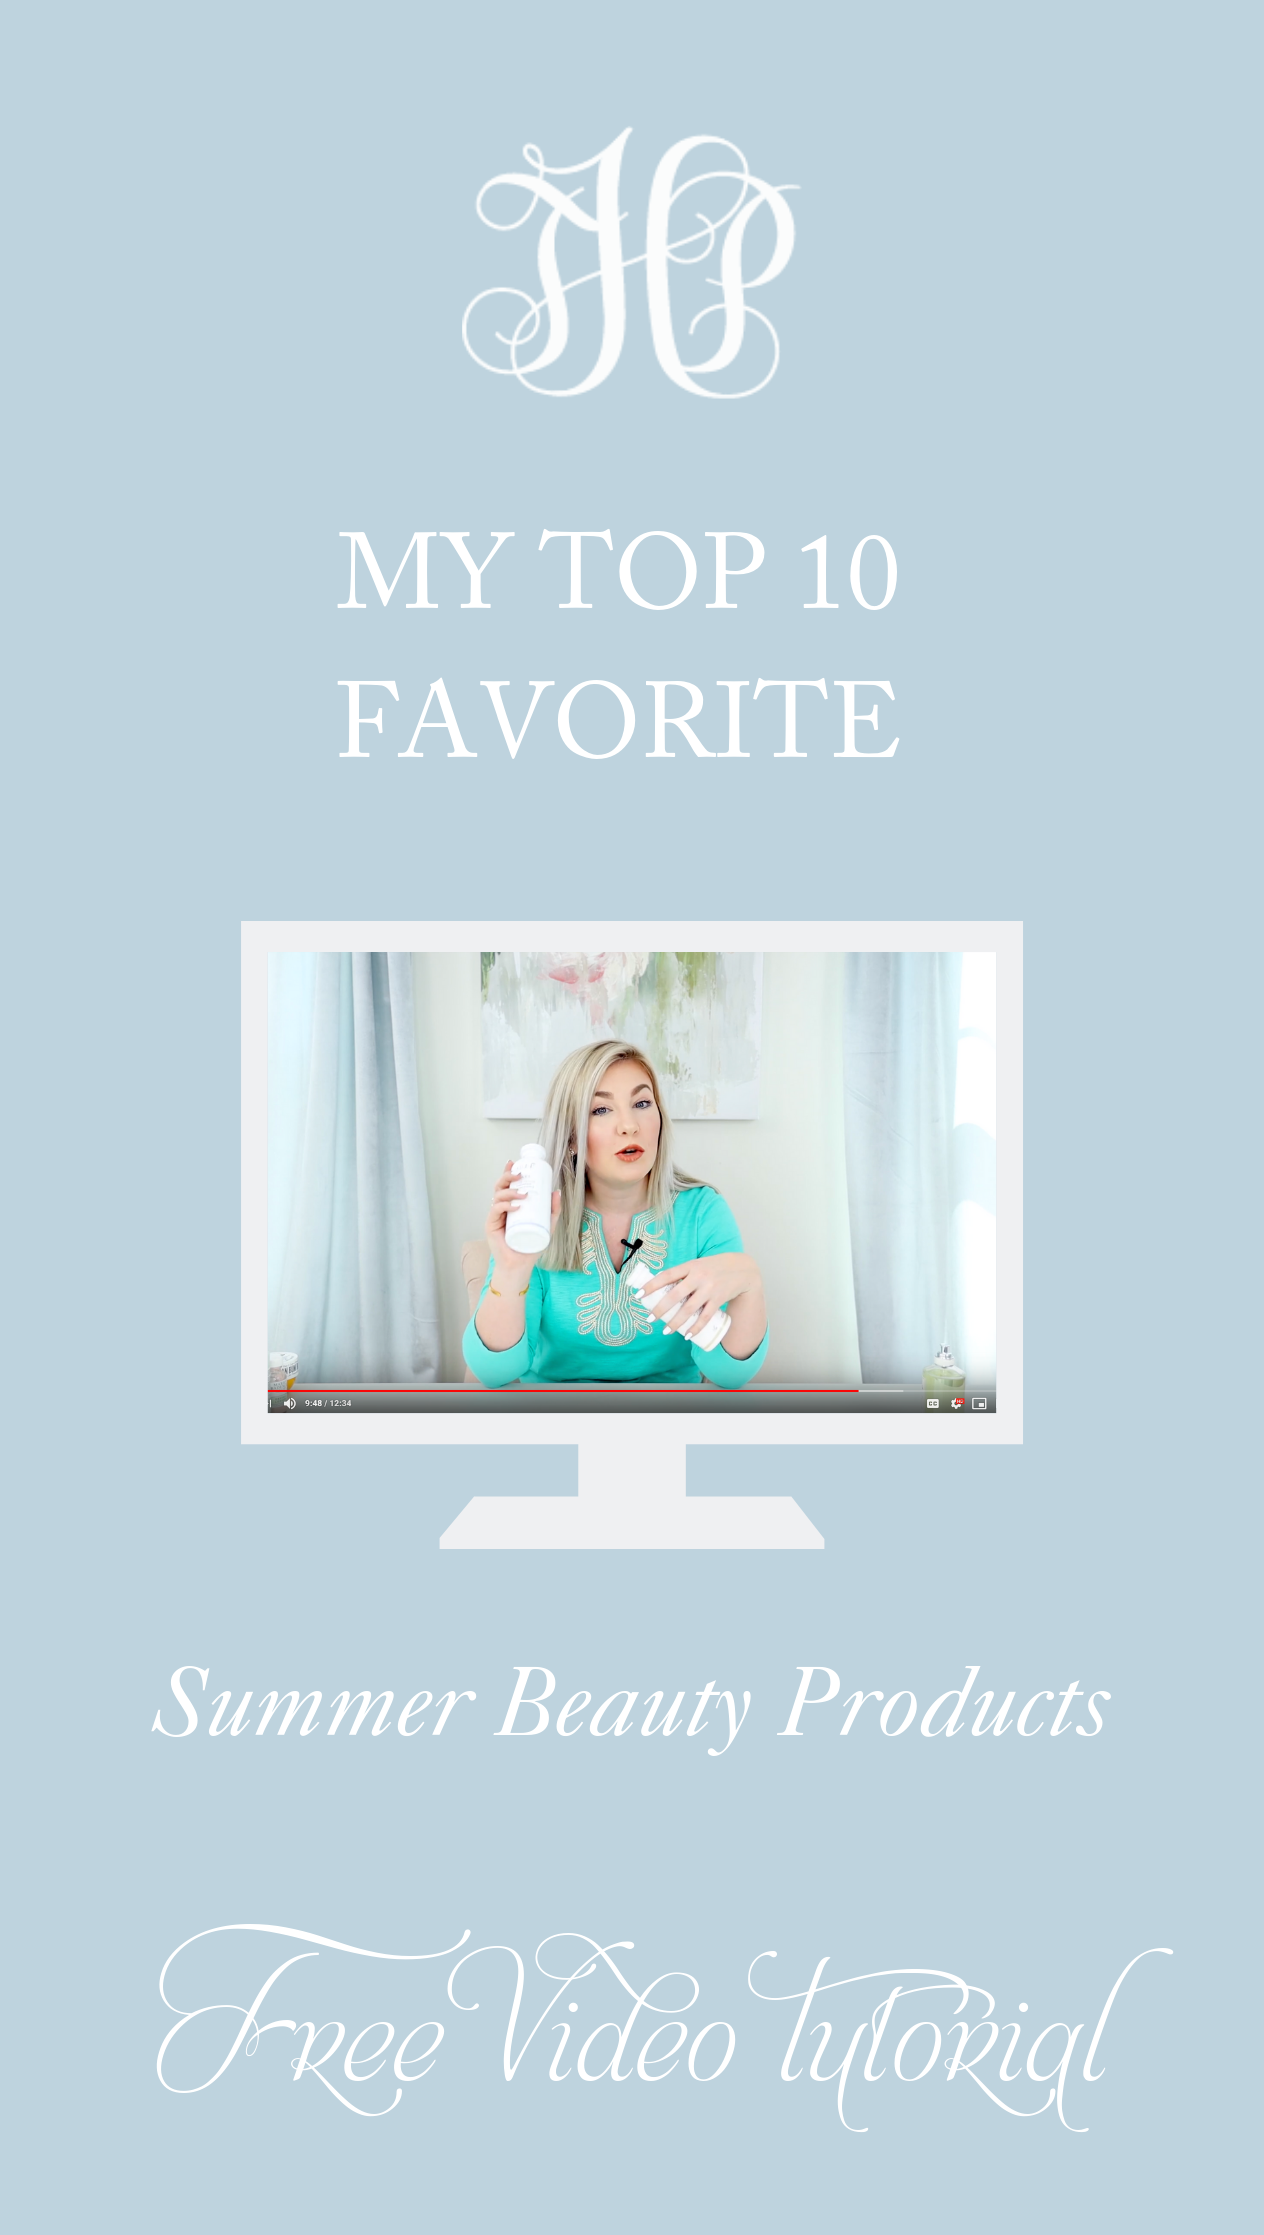 my top 10 favorite summer beauty products by hope taylor